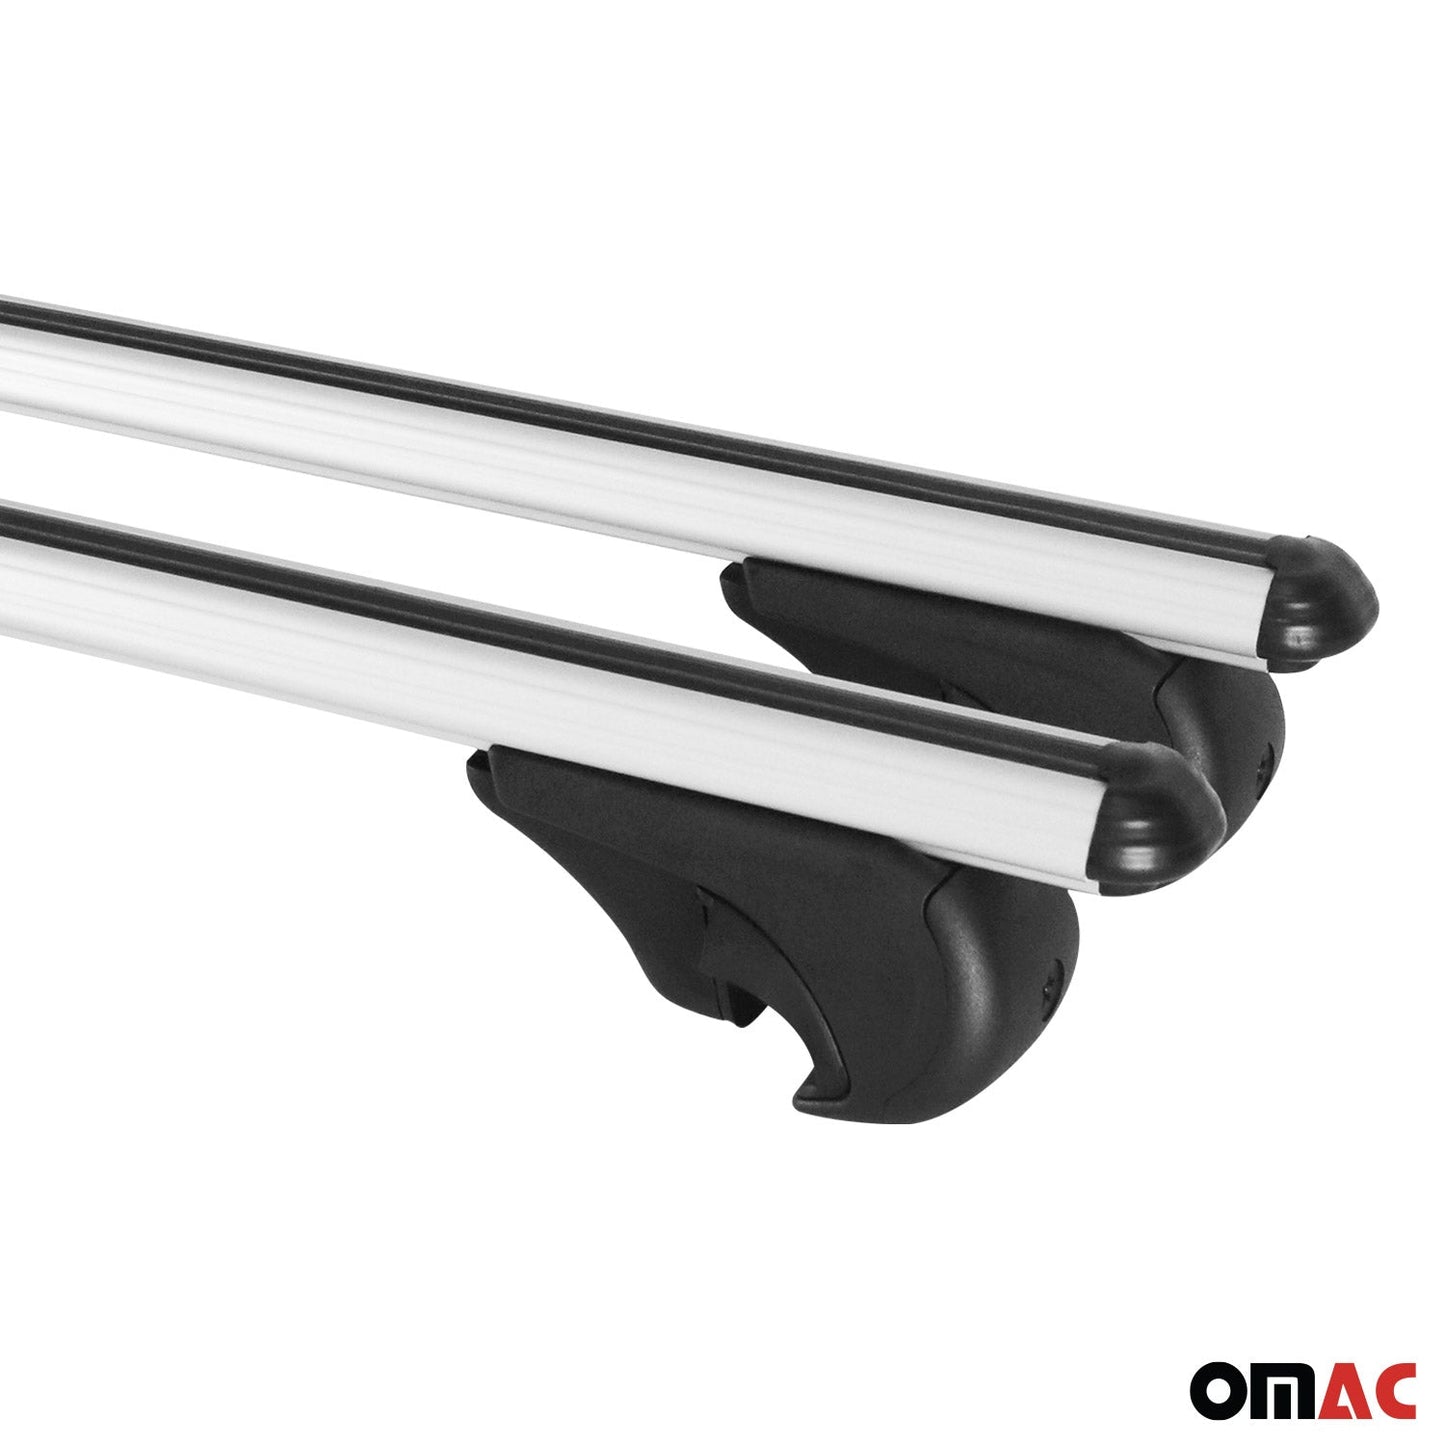 OMAC Lockable Roof Rack Cross Bars Luggage Carrier for Buick Terraza 2005-2007 Gray 31019696929M